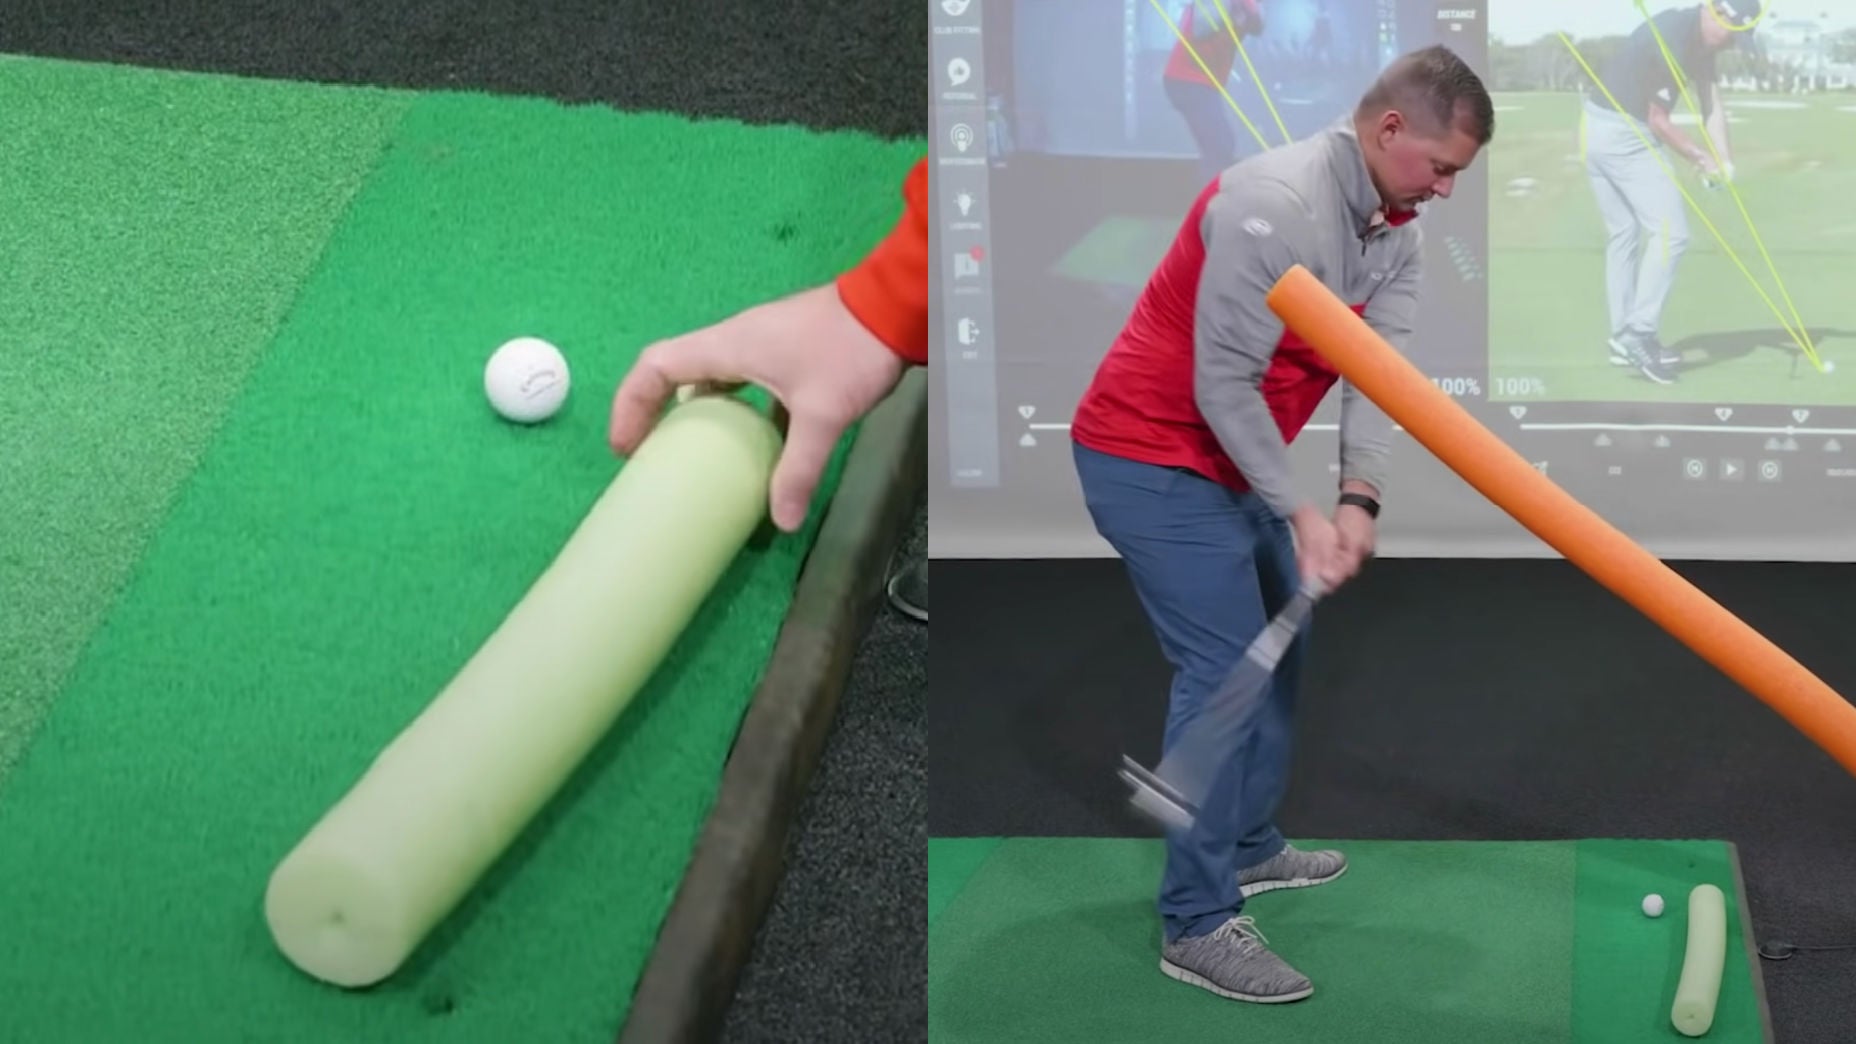 Coming over the top? These 2 foolproof drills will redirect your swing